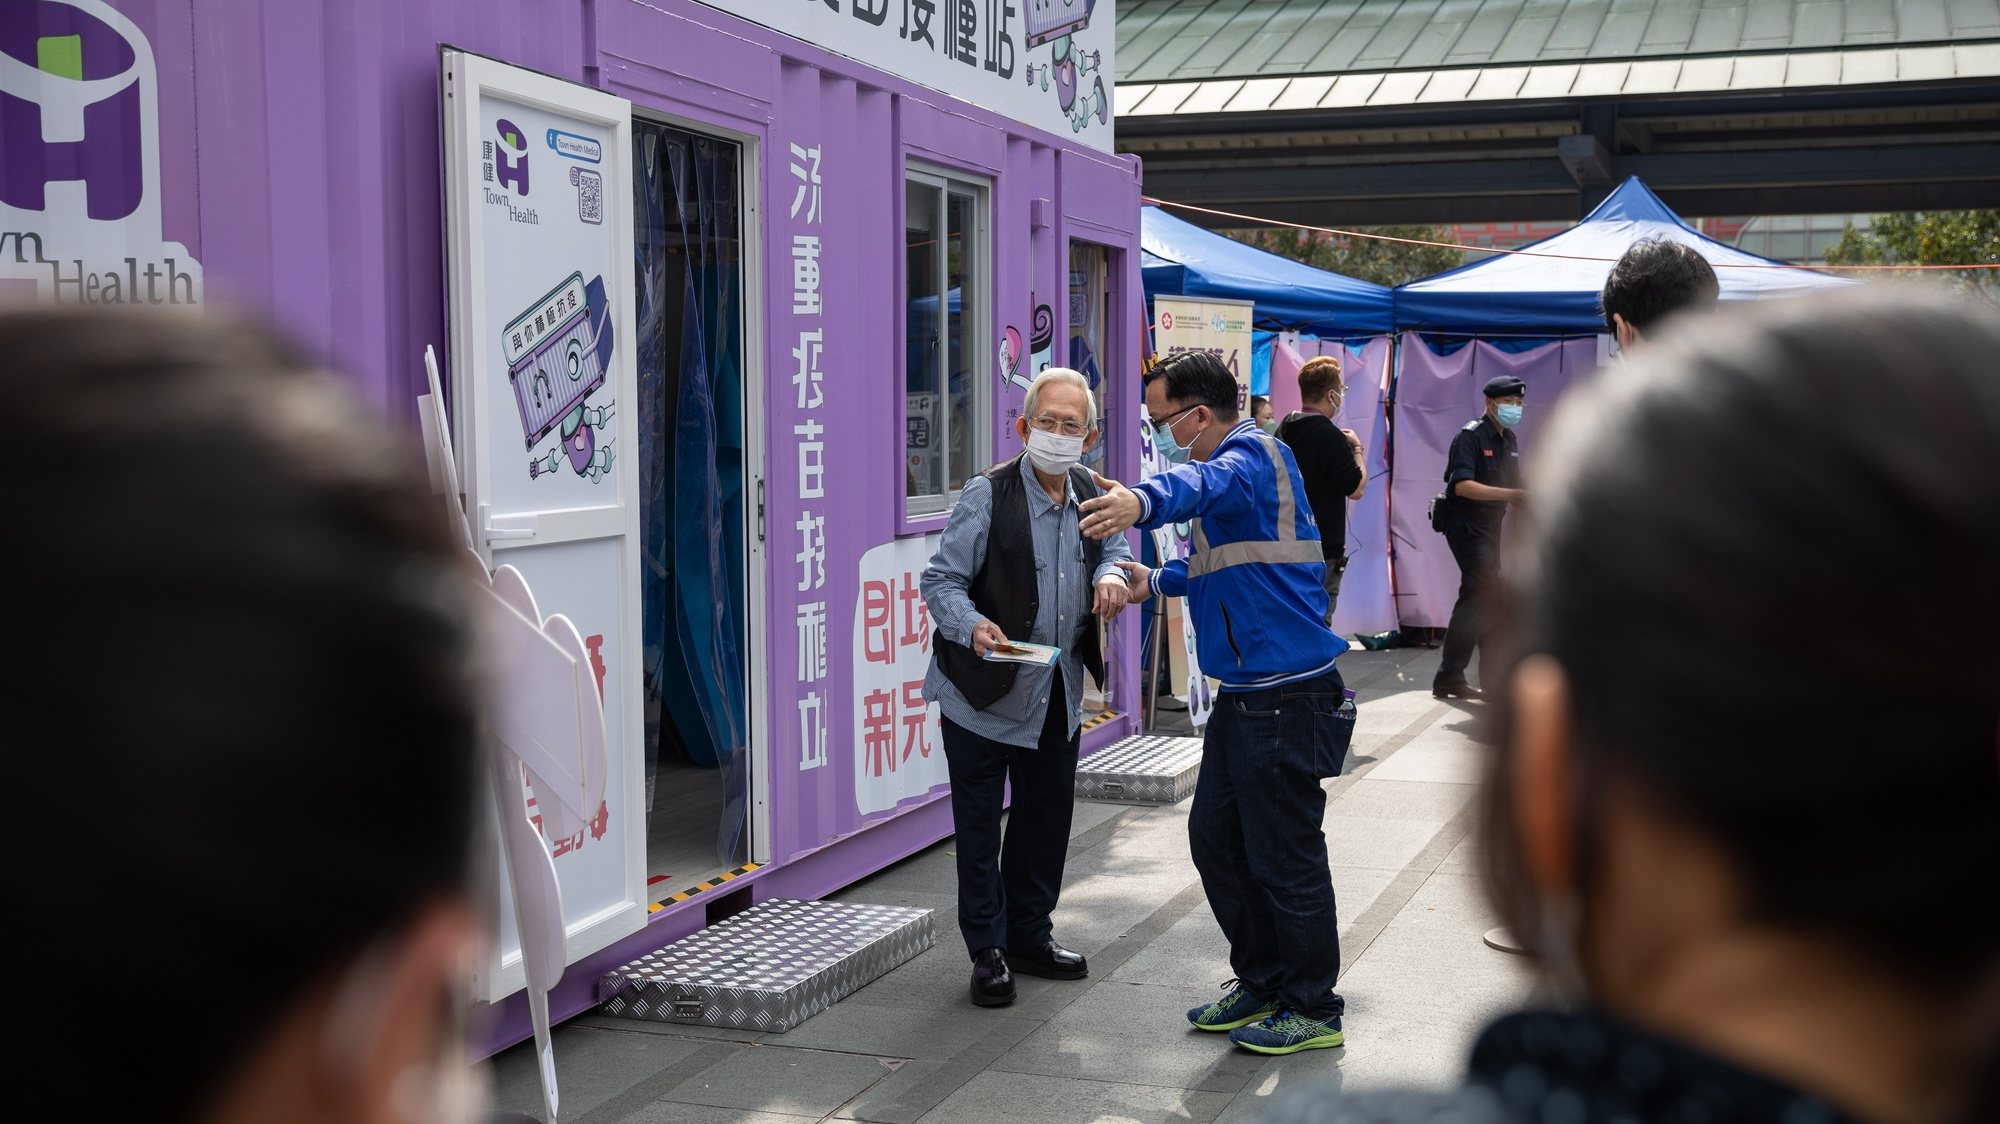 epa09671253 A man is directed to a rest area after receiving a BioNTech COVID-19 vaccine in a Mobile Vaccination Station in Hong Kong, China, 07 January 2022. The COVID-19 Mobile Vaccination Station facilitates the vaccination of elderly persons and also offers walk-in services.  EPA/JEROME FAVRE